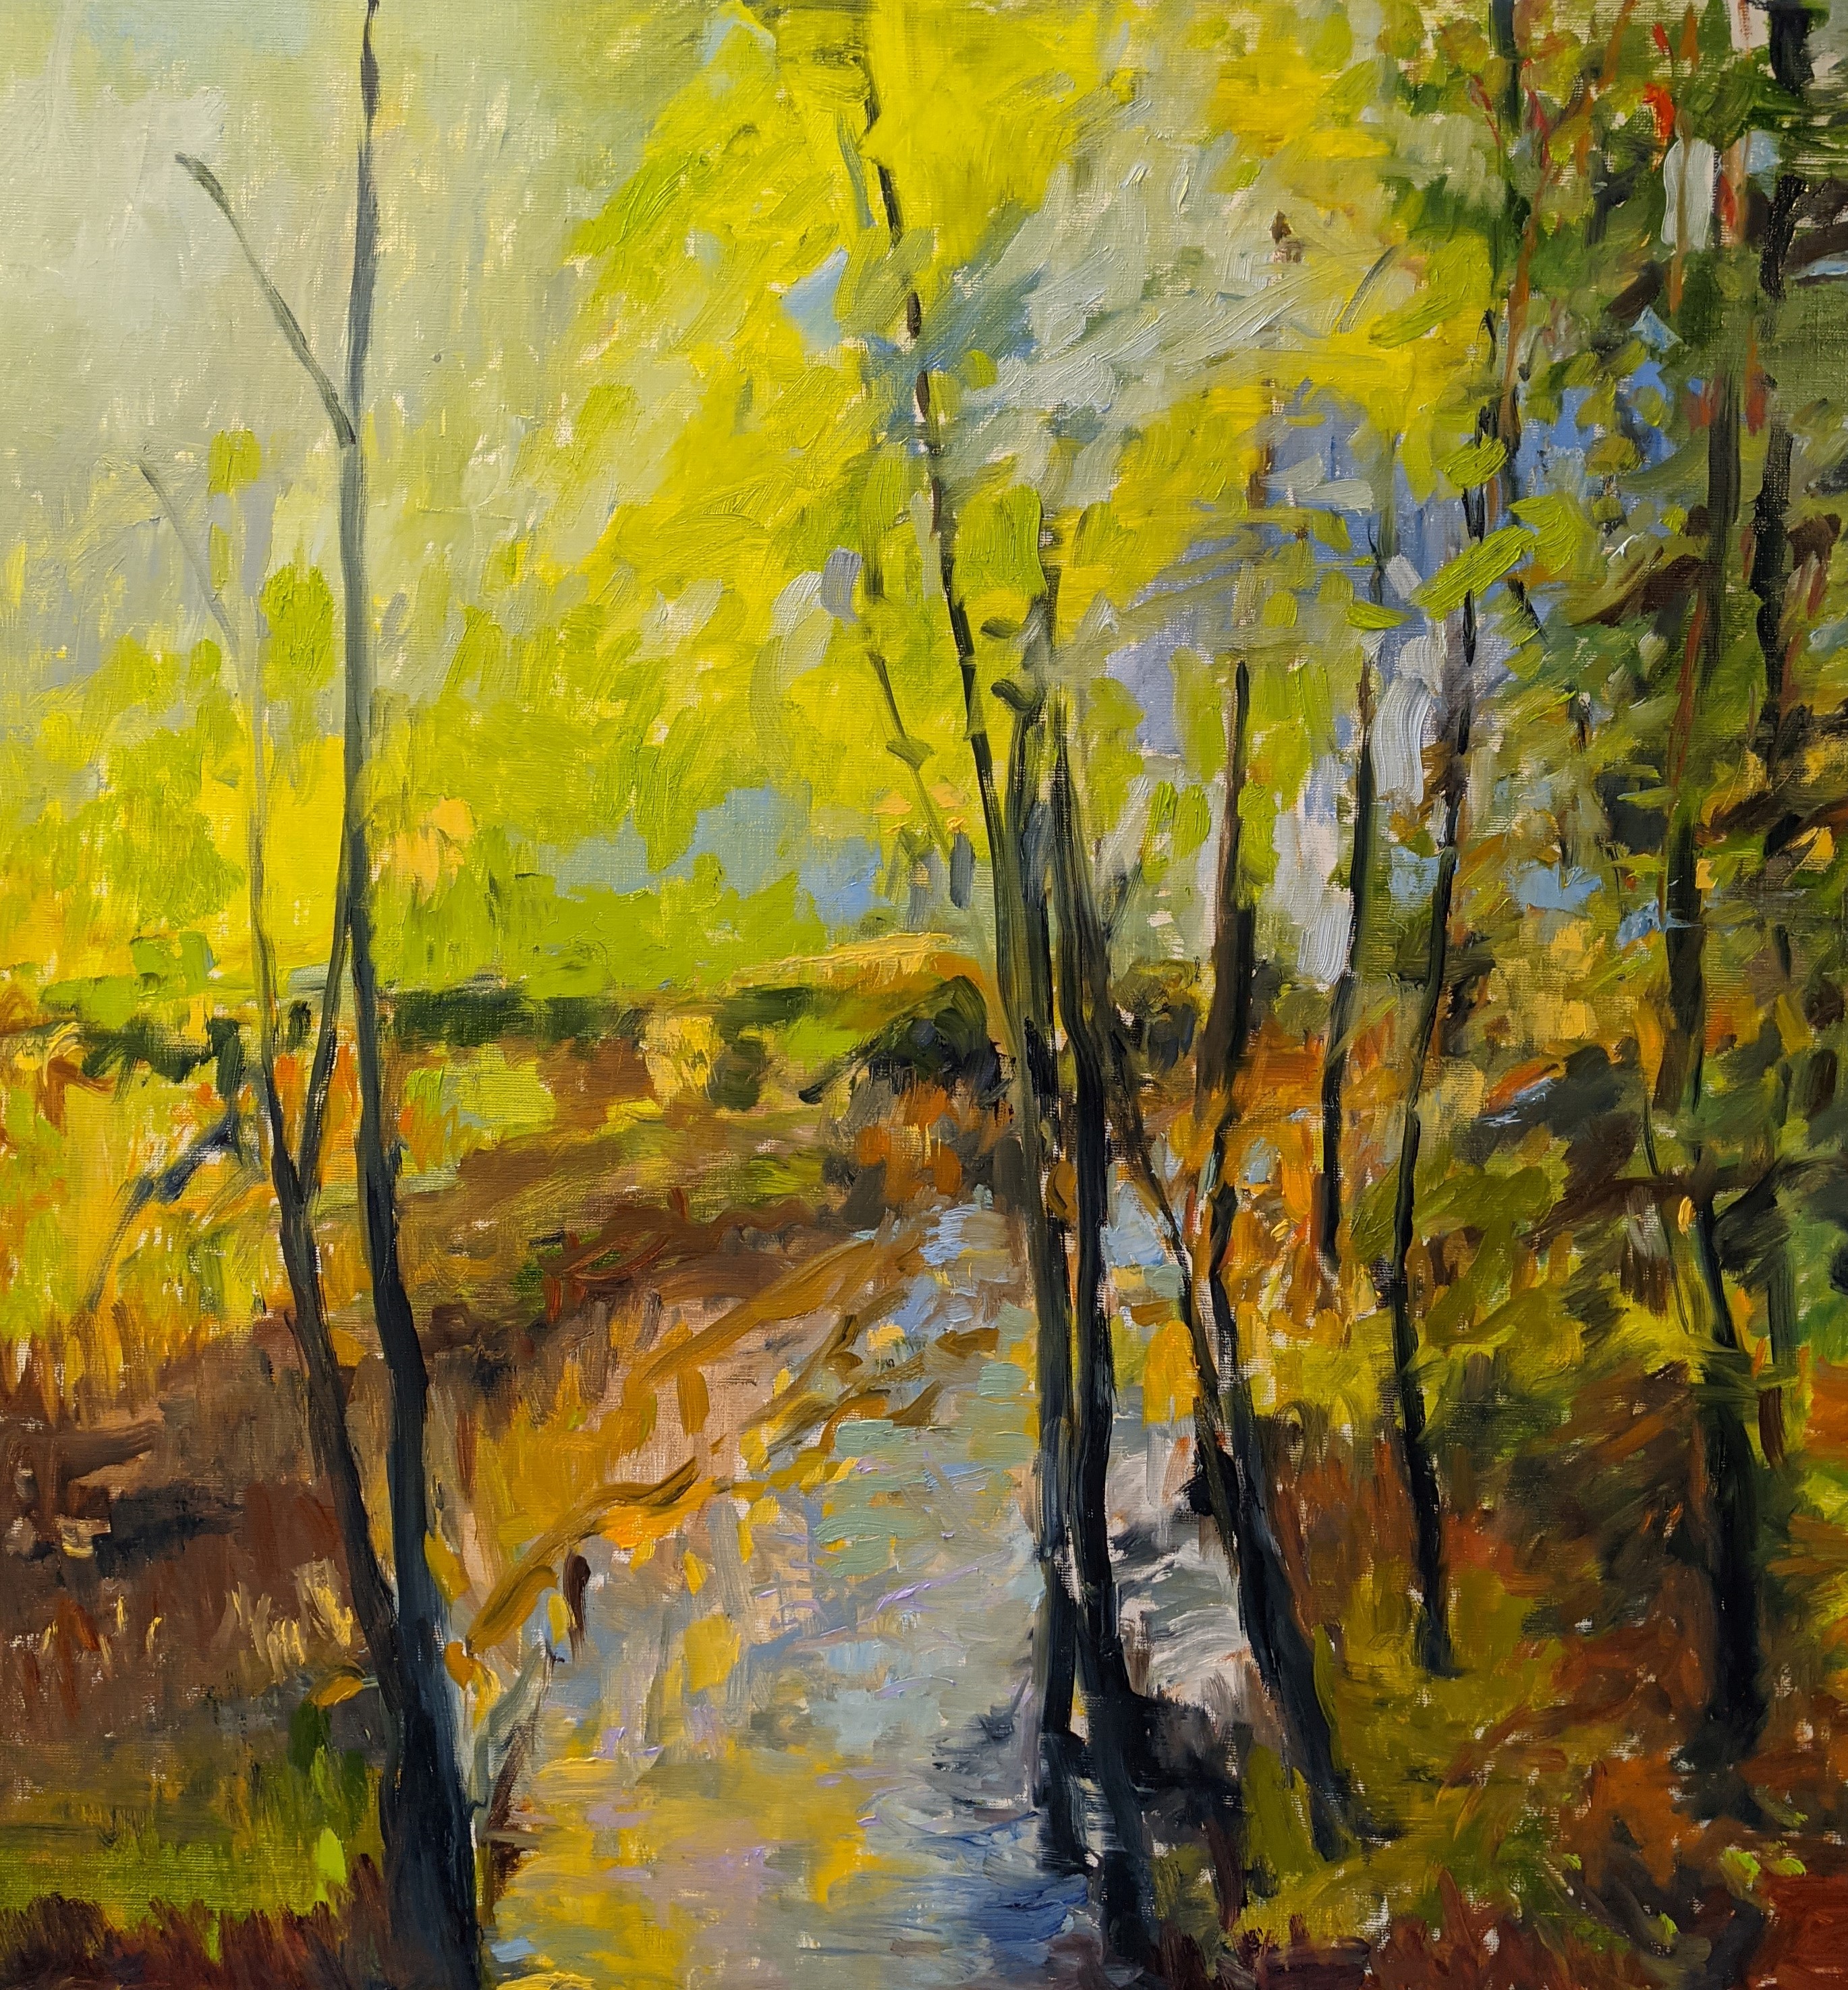 Roberta Shea, Down by the River Painting